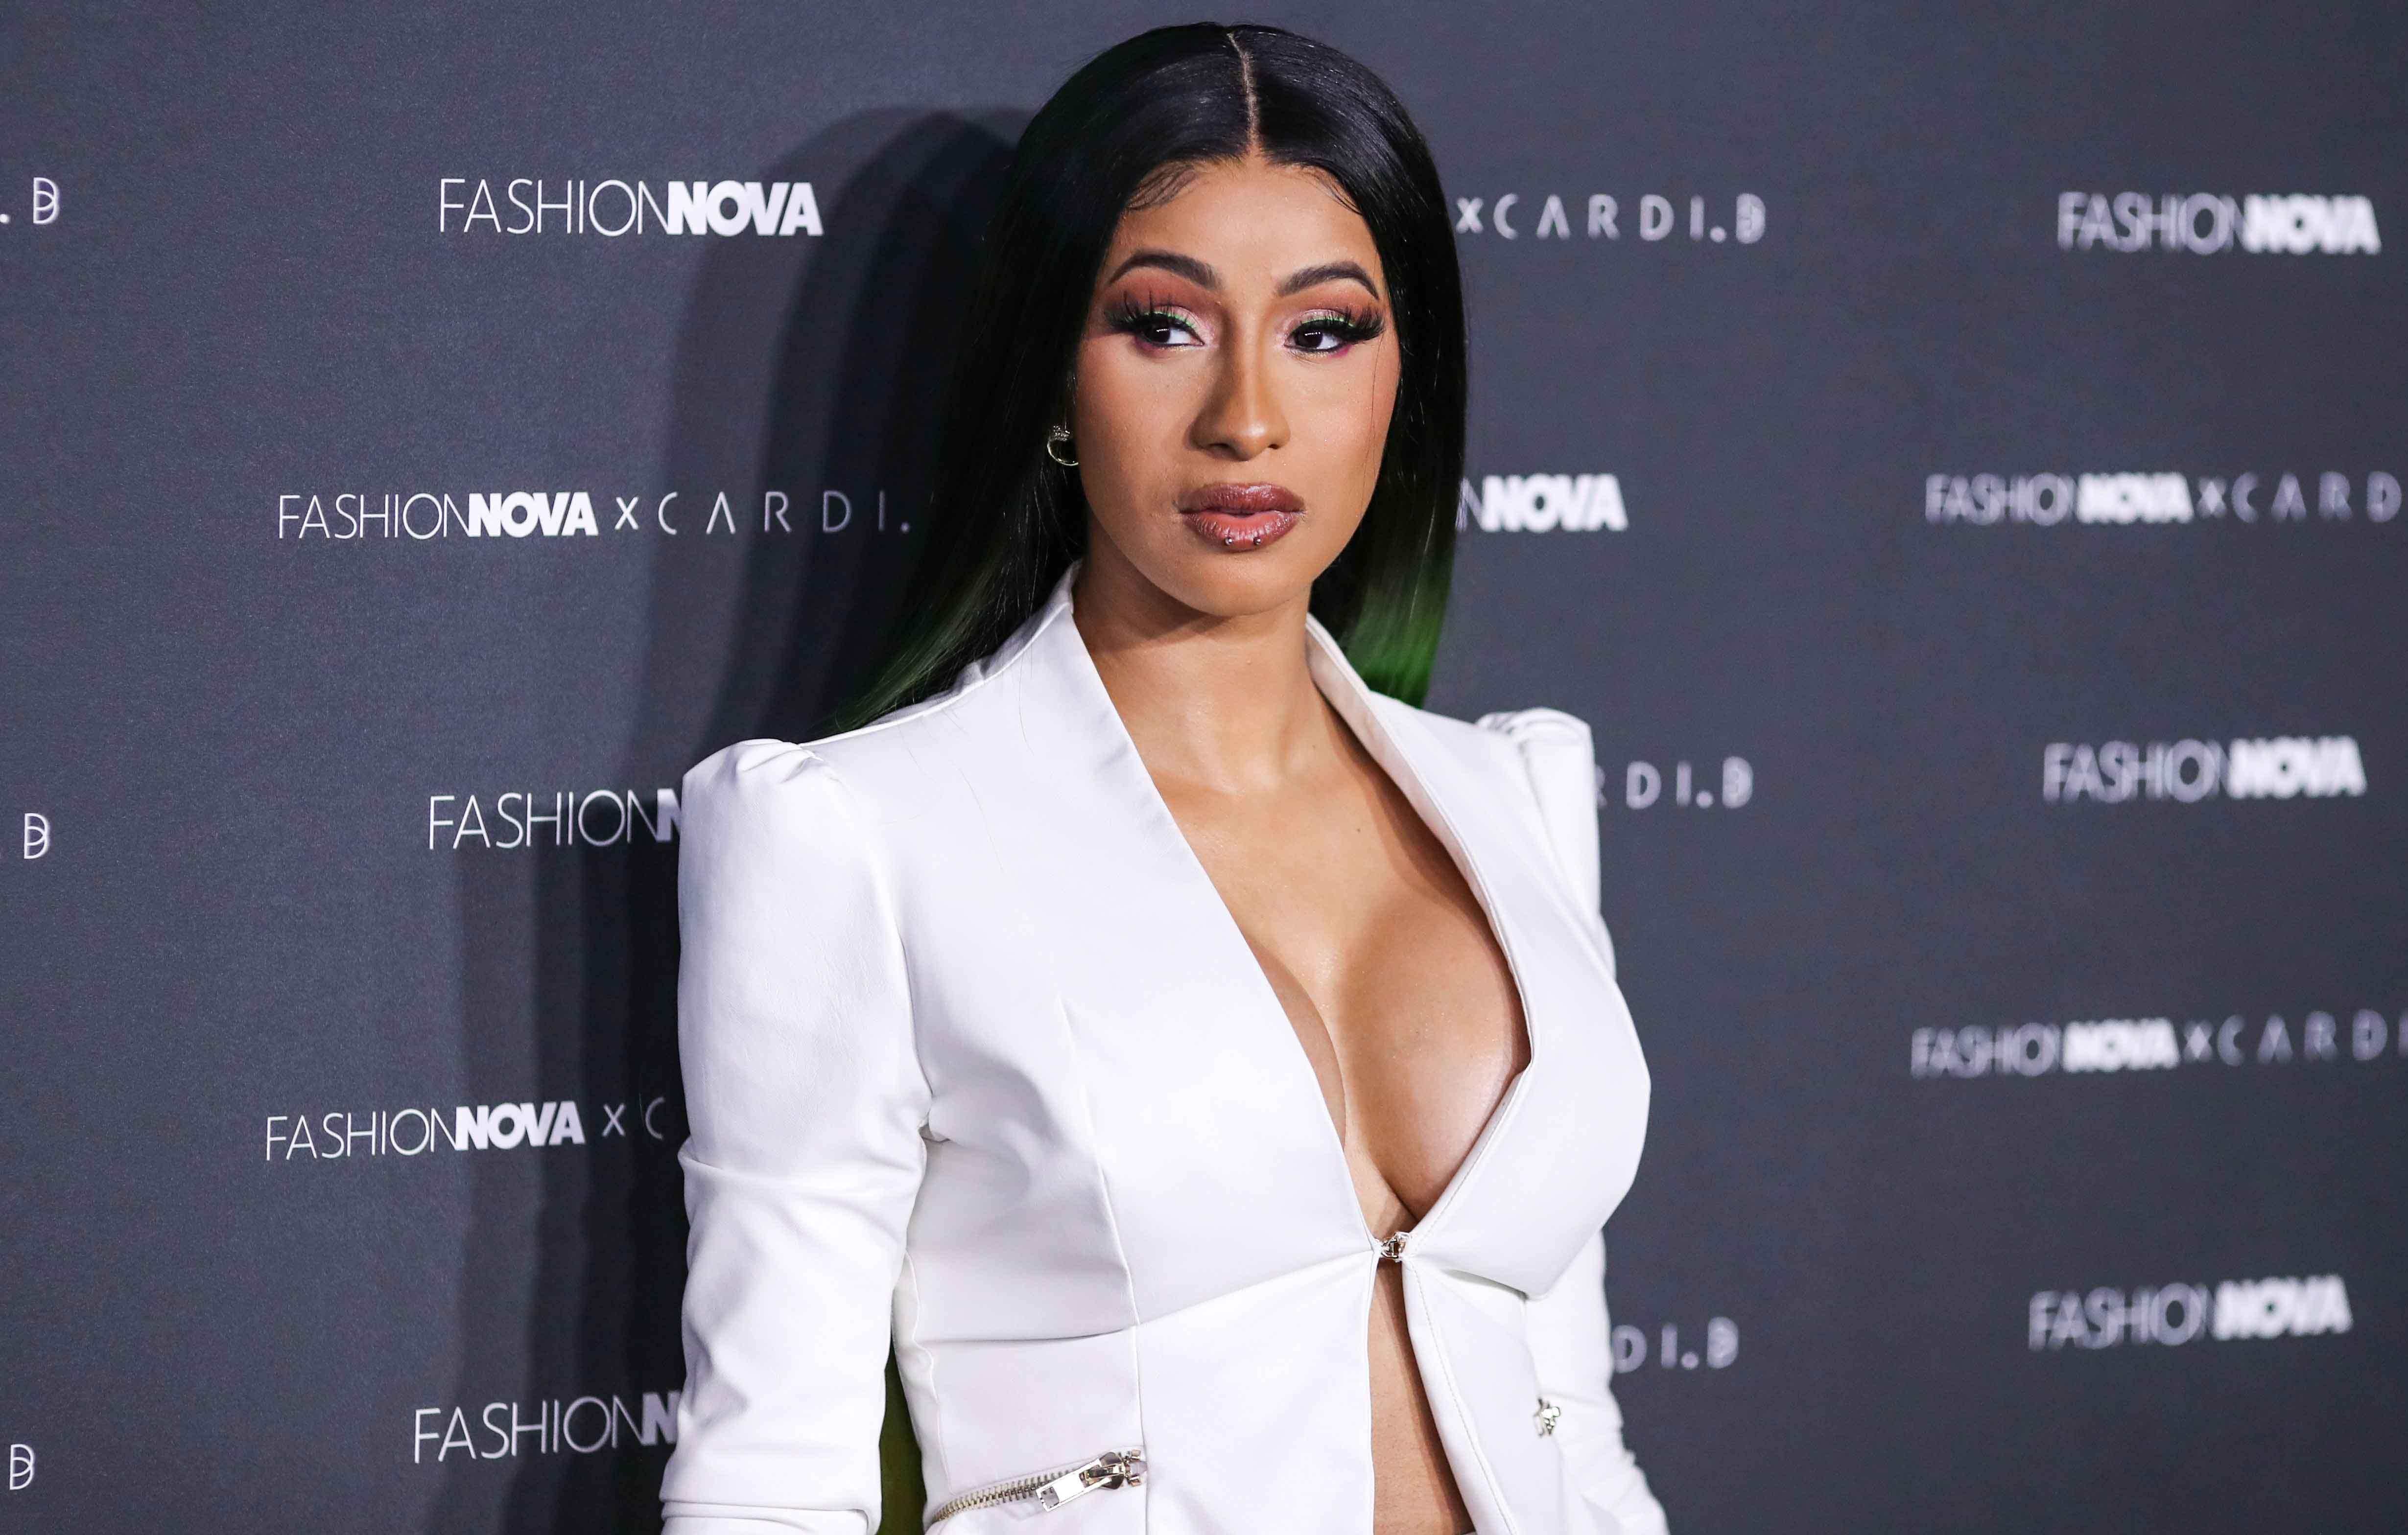 Check Out: Cardi B Posts a Series of Images Wearing a Skintight White Dress  at the poolside